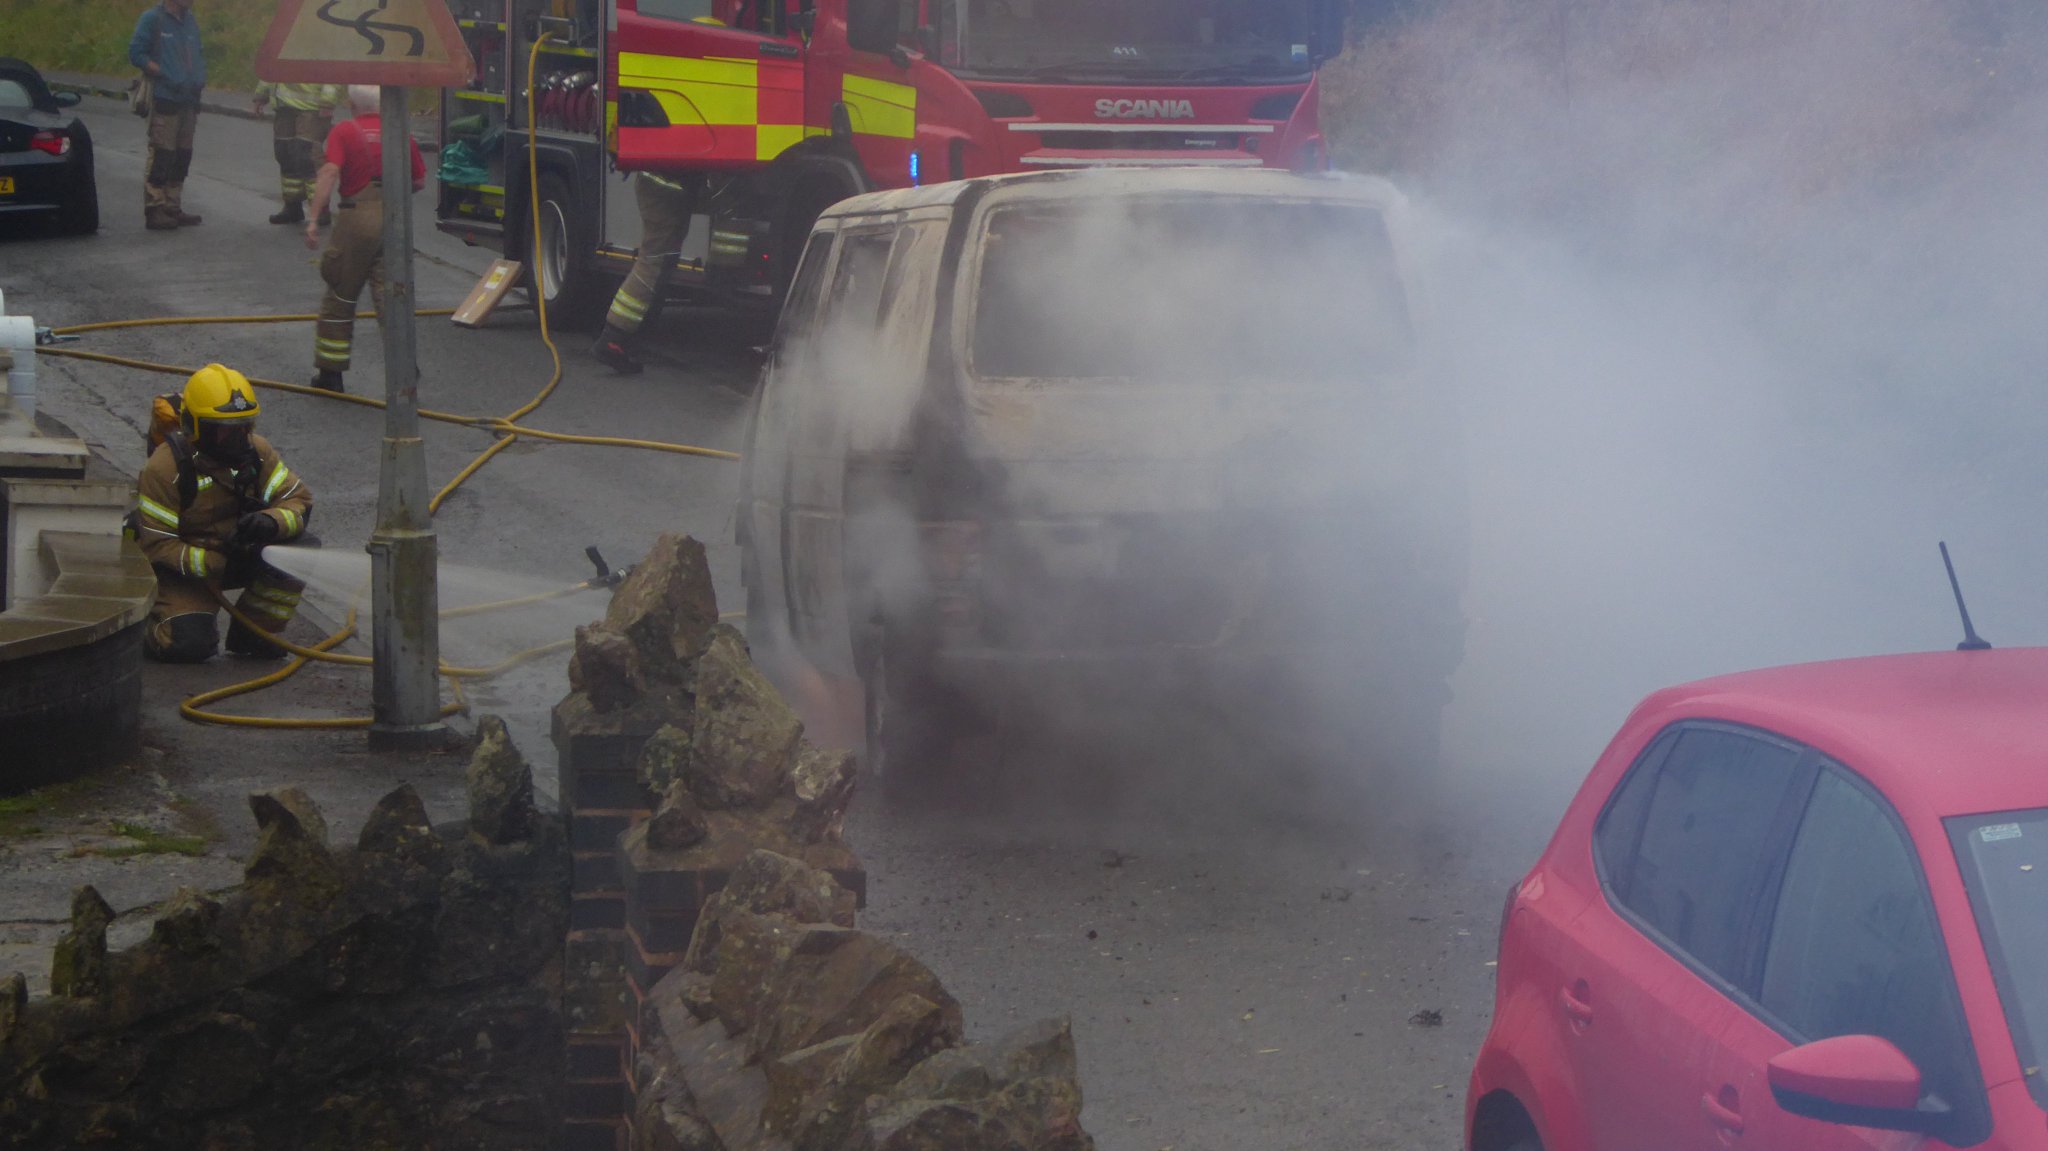 NEWS | Fire crews respond to a vehicle fire in Malvern